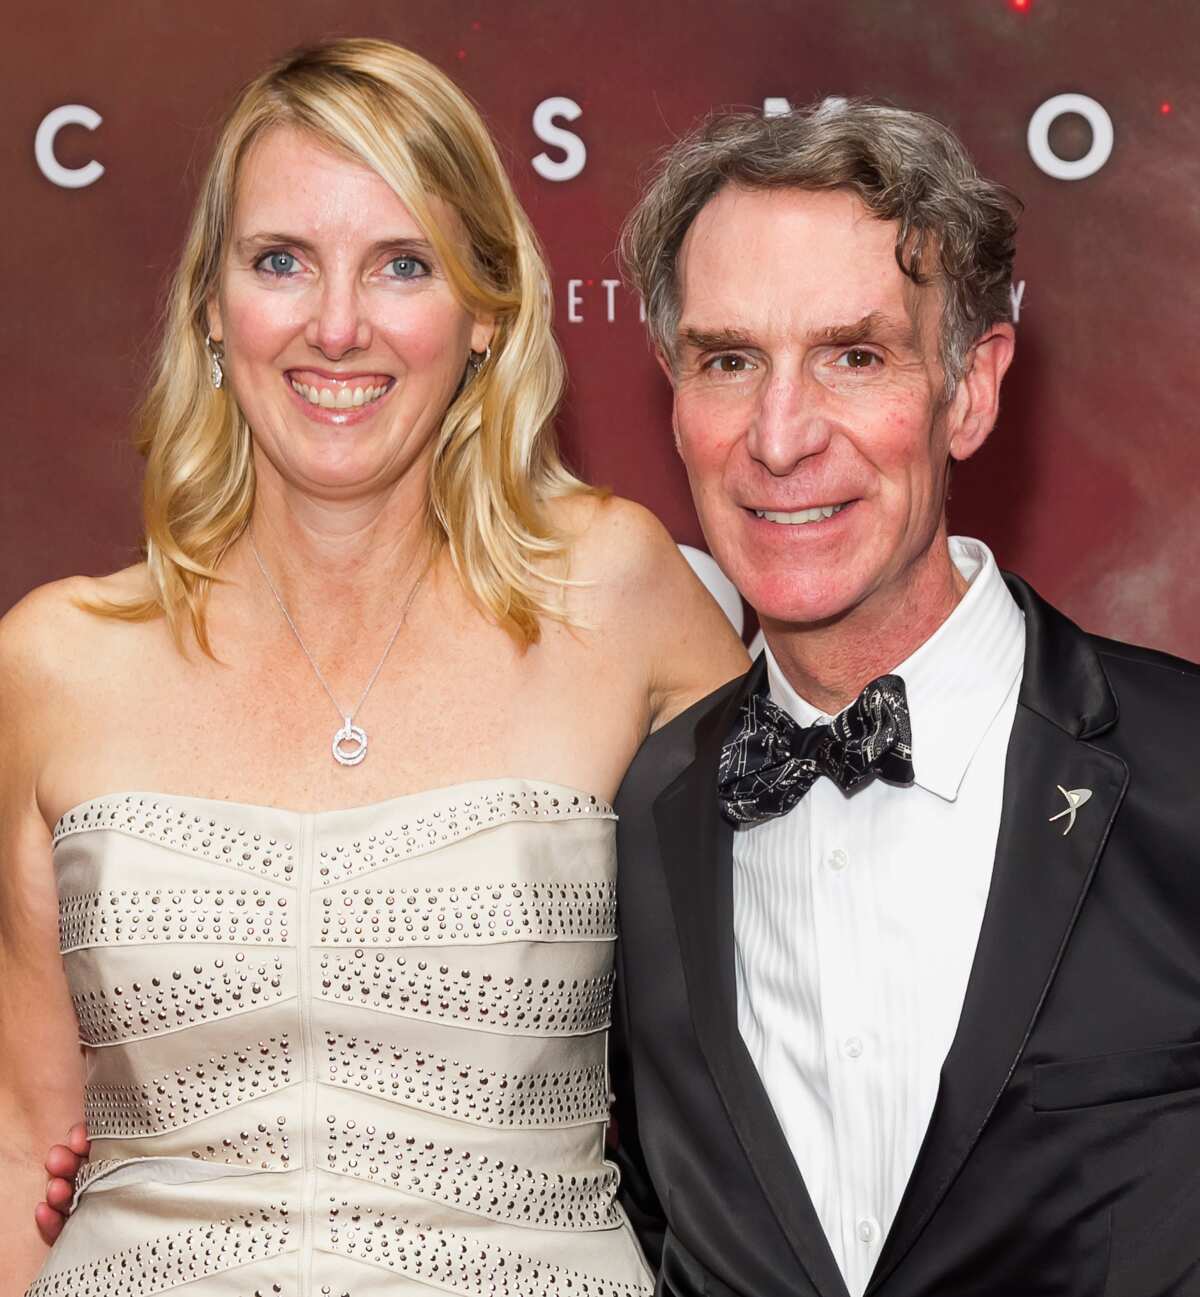 Charity Nye biography what is known about Bill Nye's daughter? Legit.ng